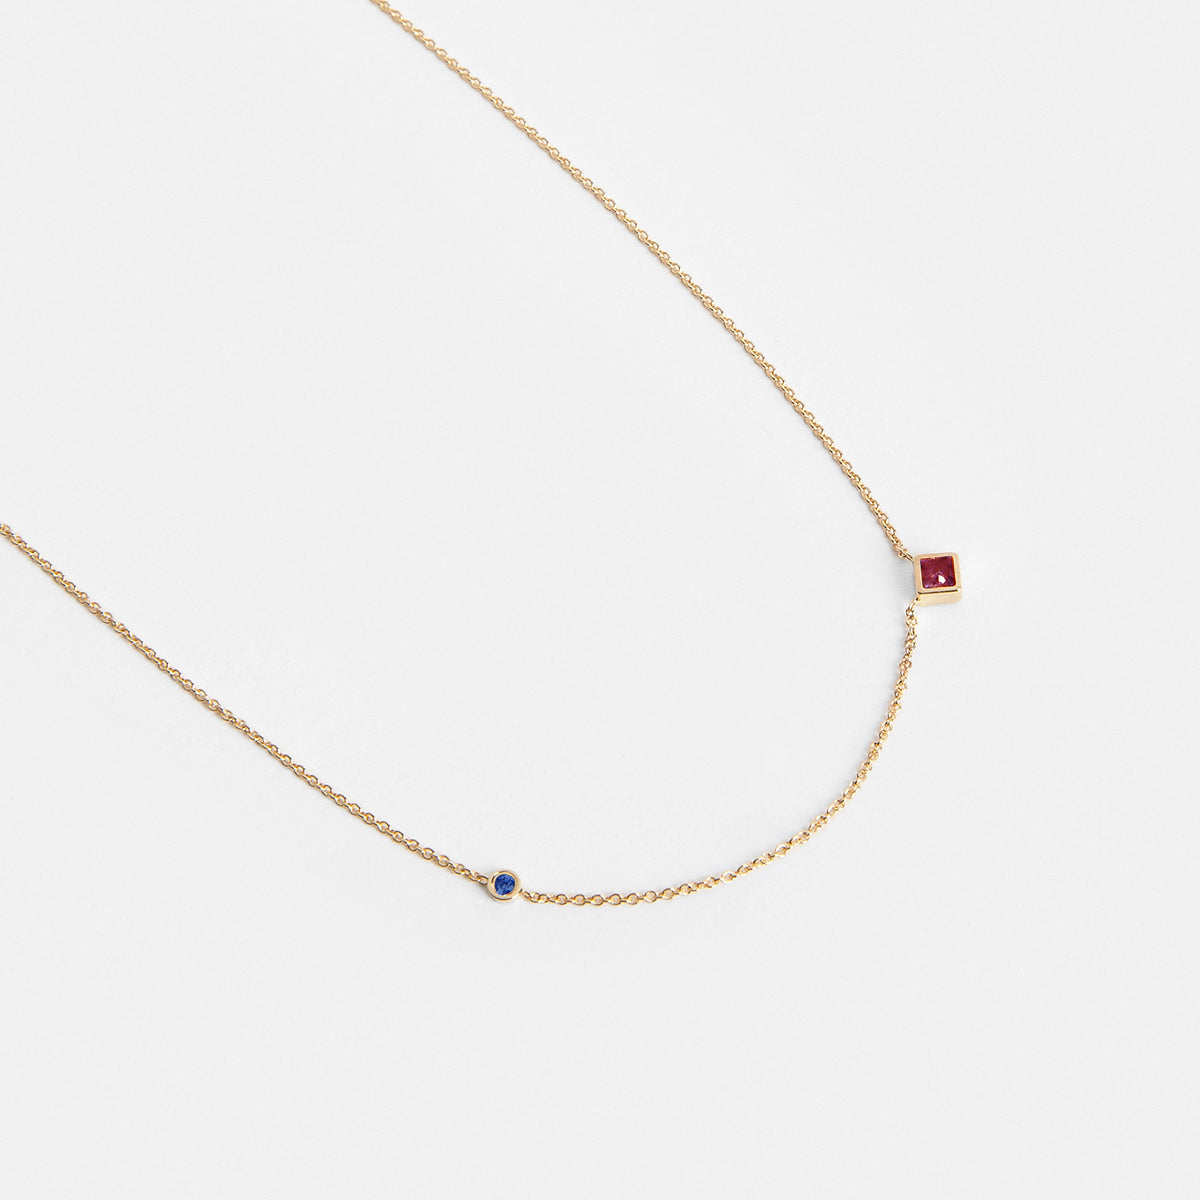 Isu Handmade Necklace in 14k Gold set with Ruby and Sapphire By SHW Fine Jewelry NYC